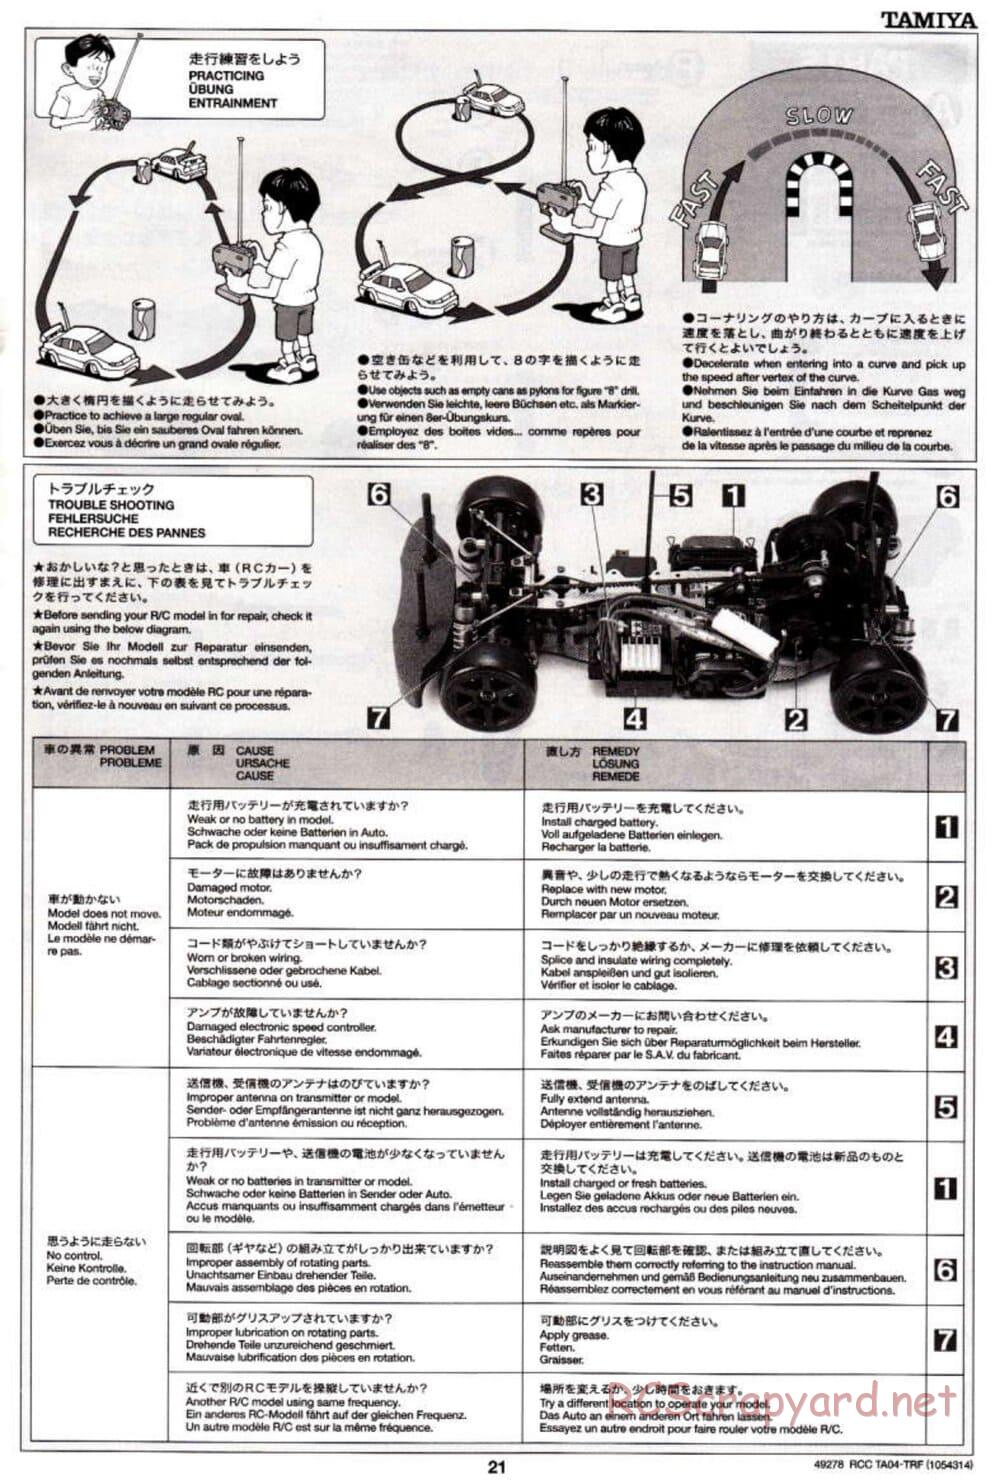 Tamiya - TA-04 TRF Special Chassis Chassis - Manual - Page 21